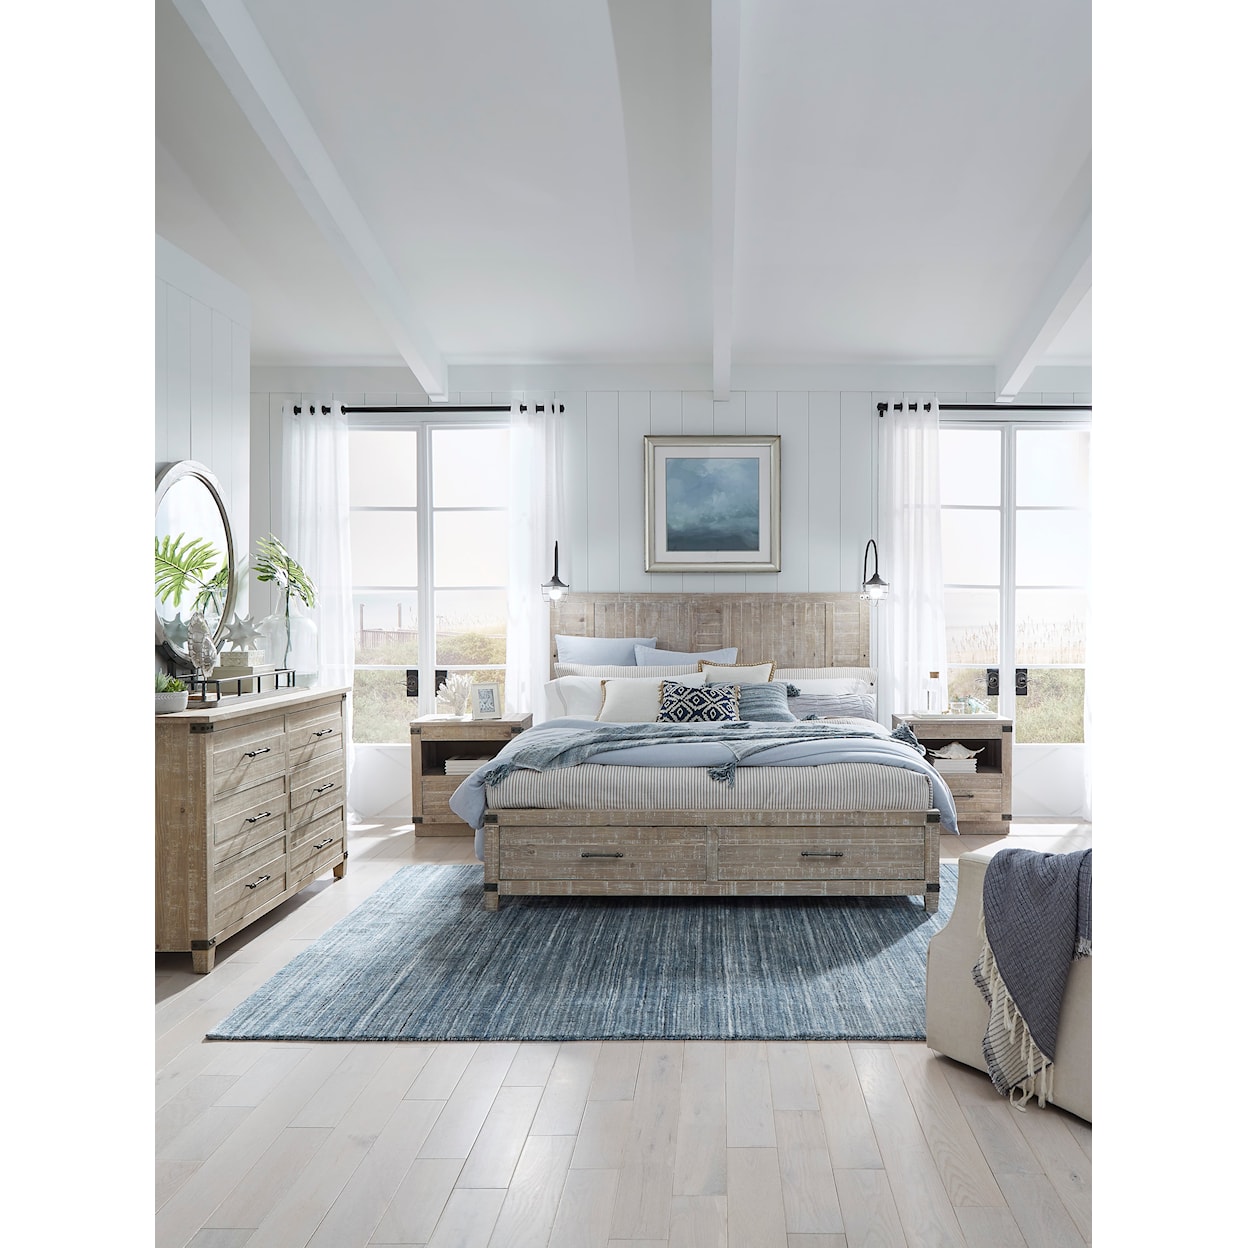 Aspenhome Foundry King Storage Panel Bed